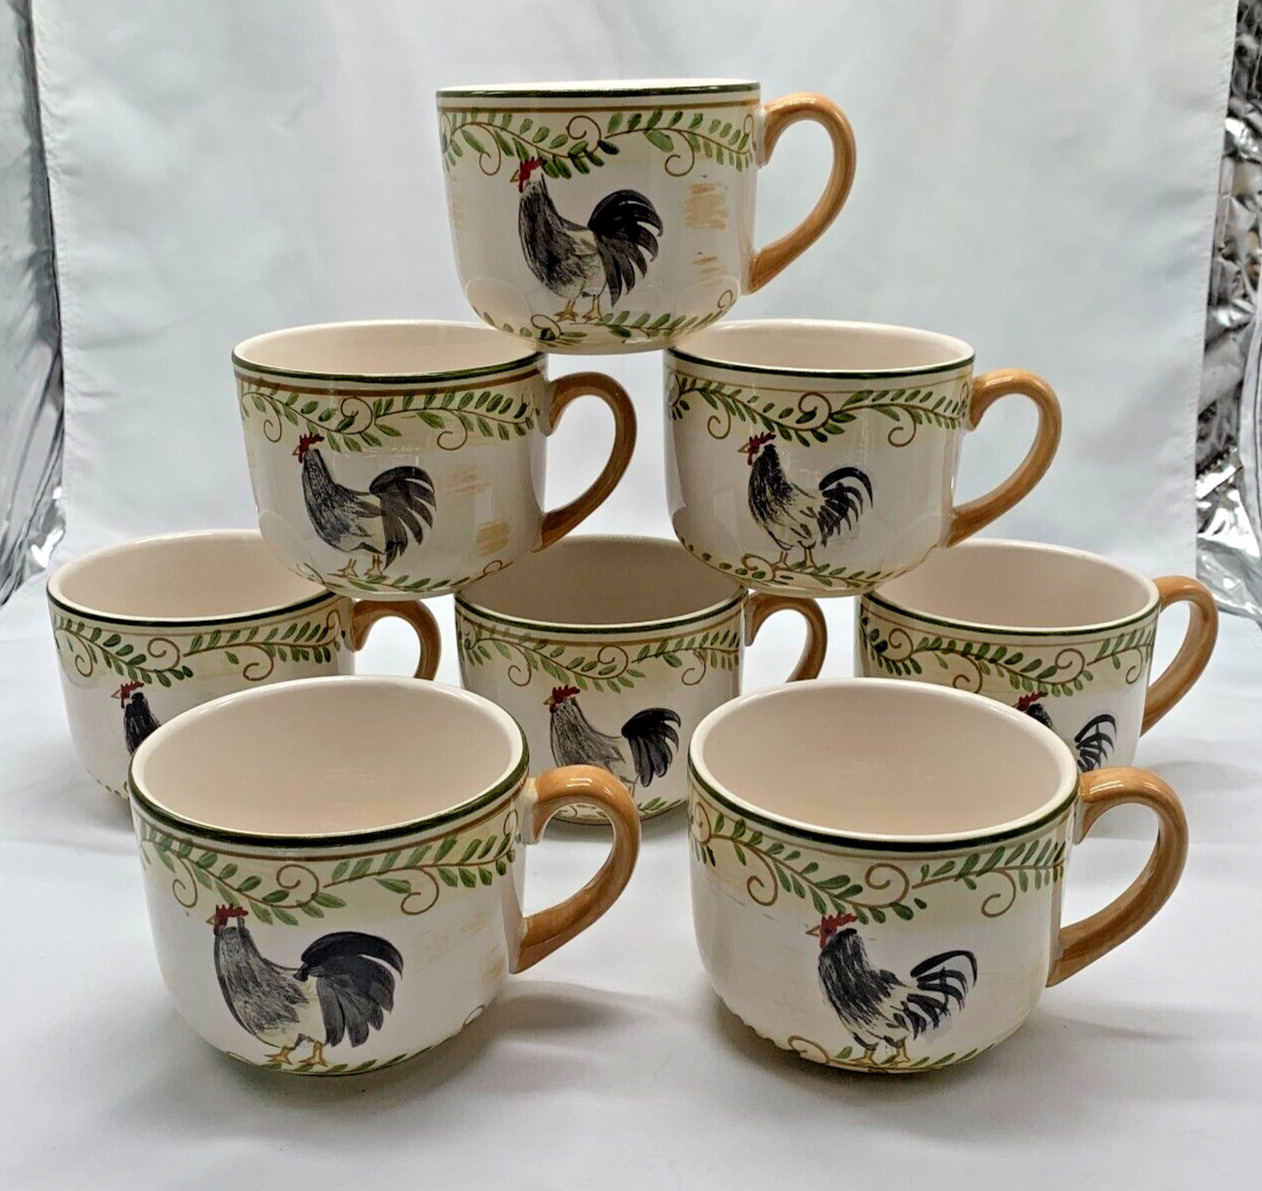 PFALTZGRAFF Lot of 8 Jumbo Soup Mugs - Lifetime Brands Country Cottage Rooster